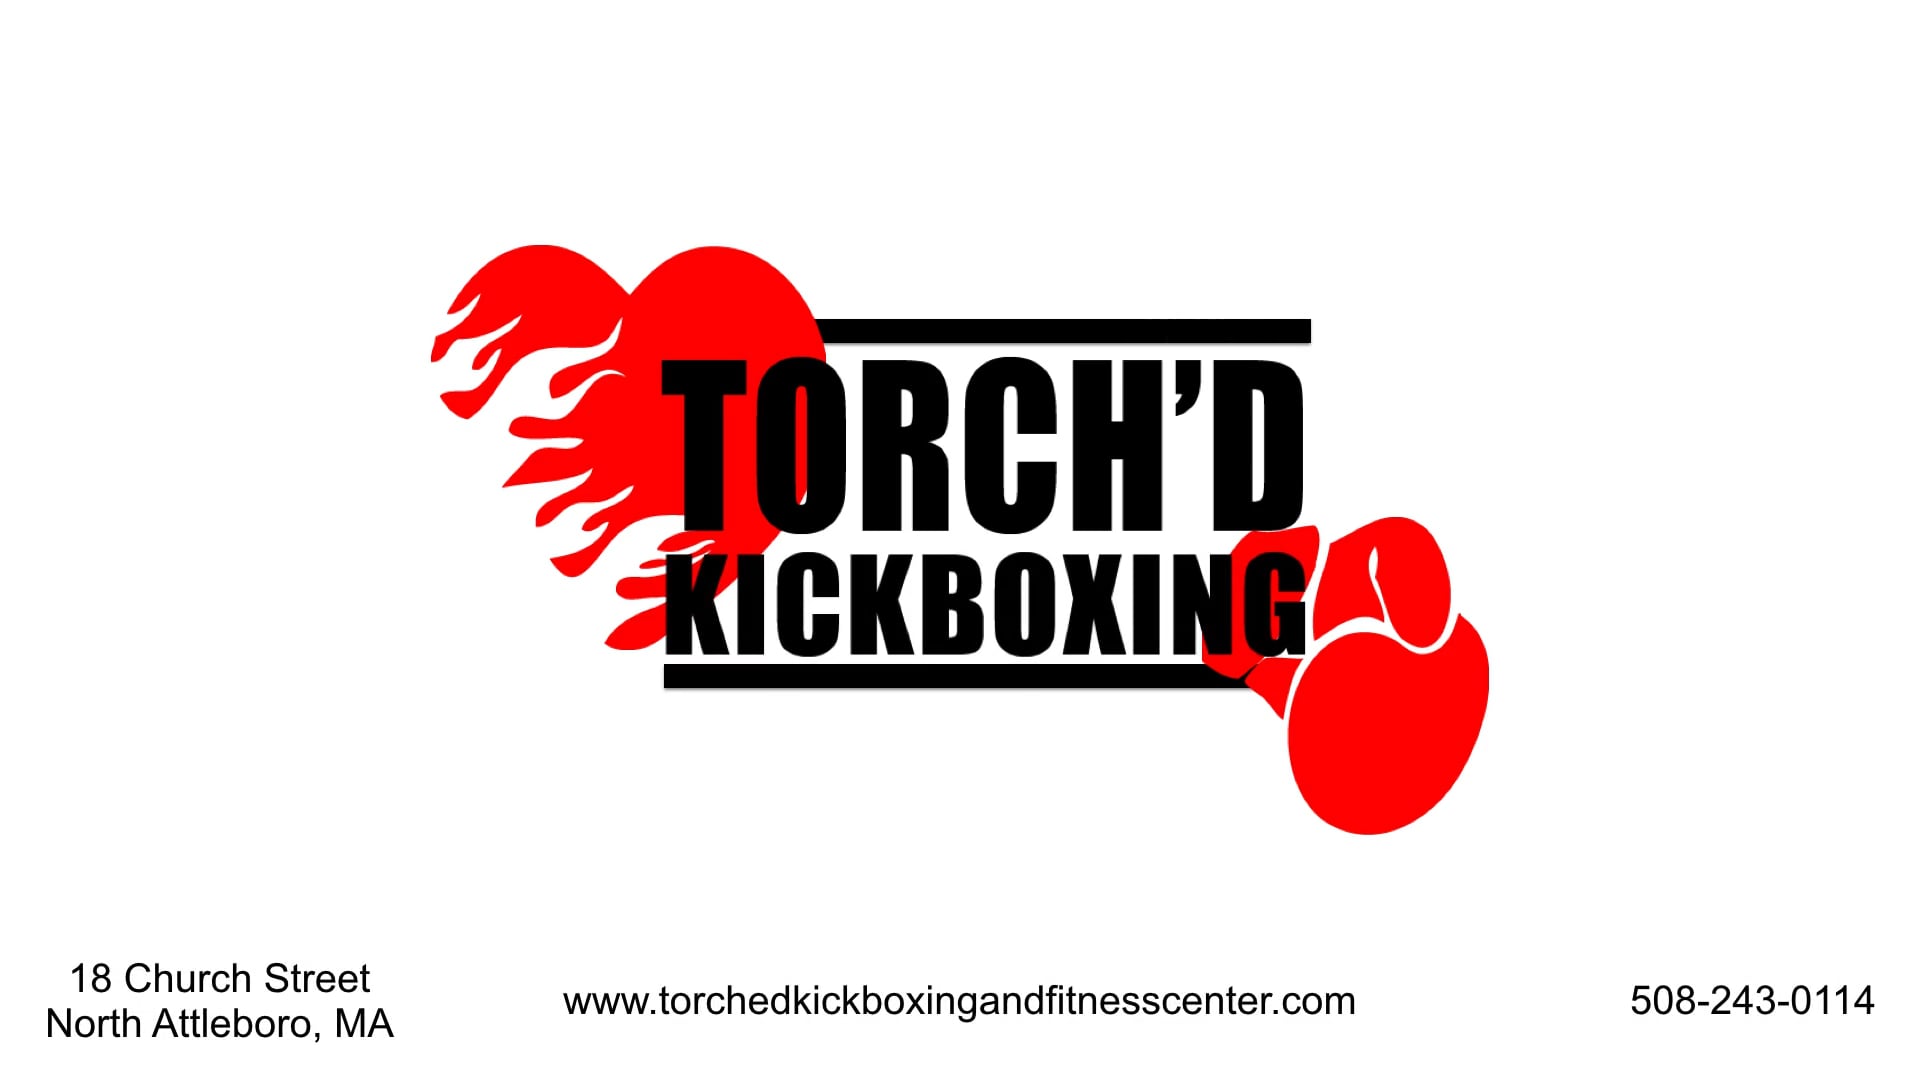 Torch'd Kickboxing Business Profile